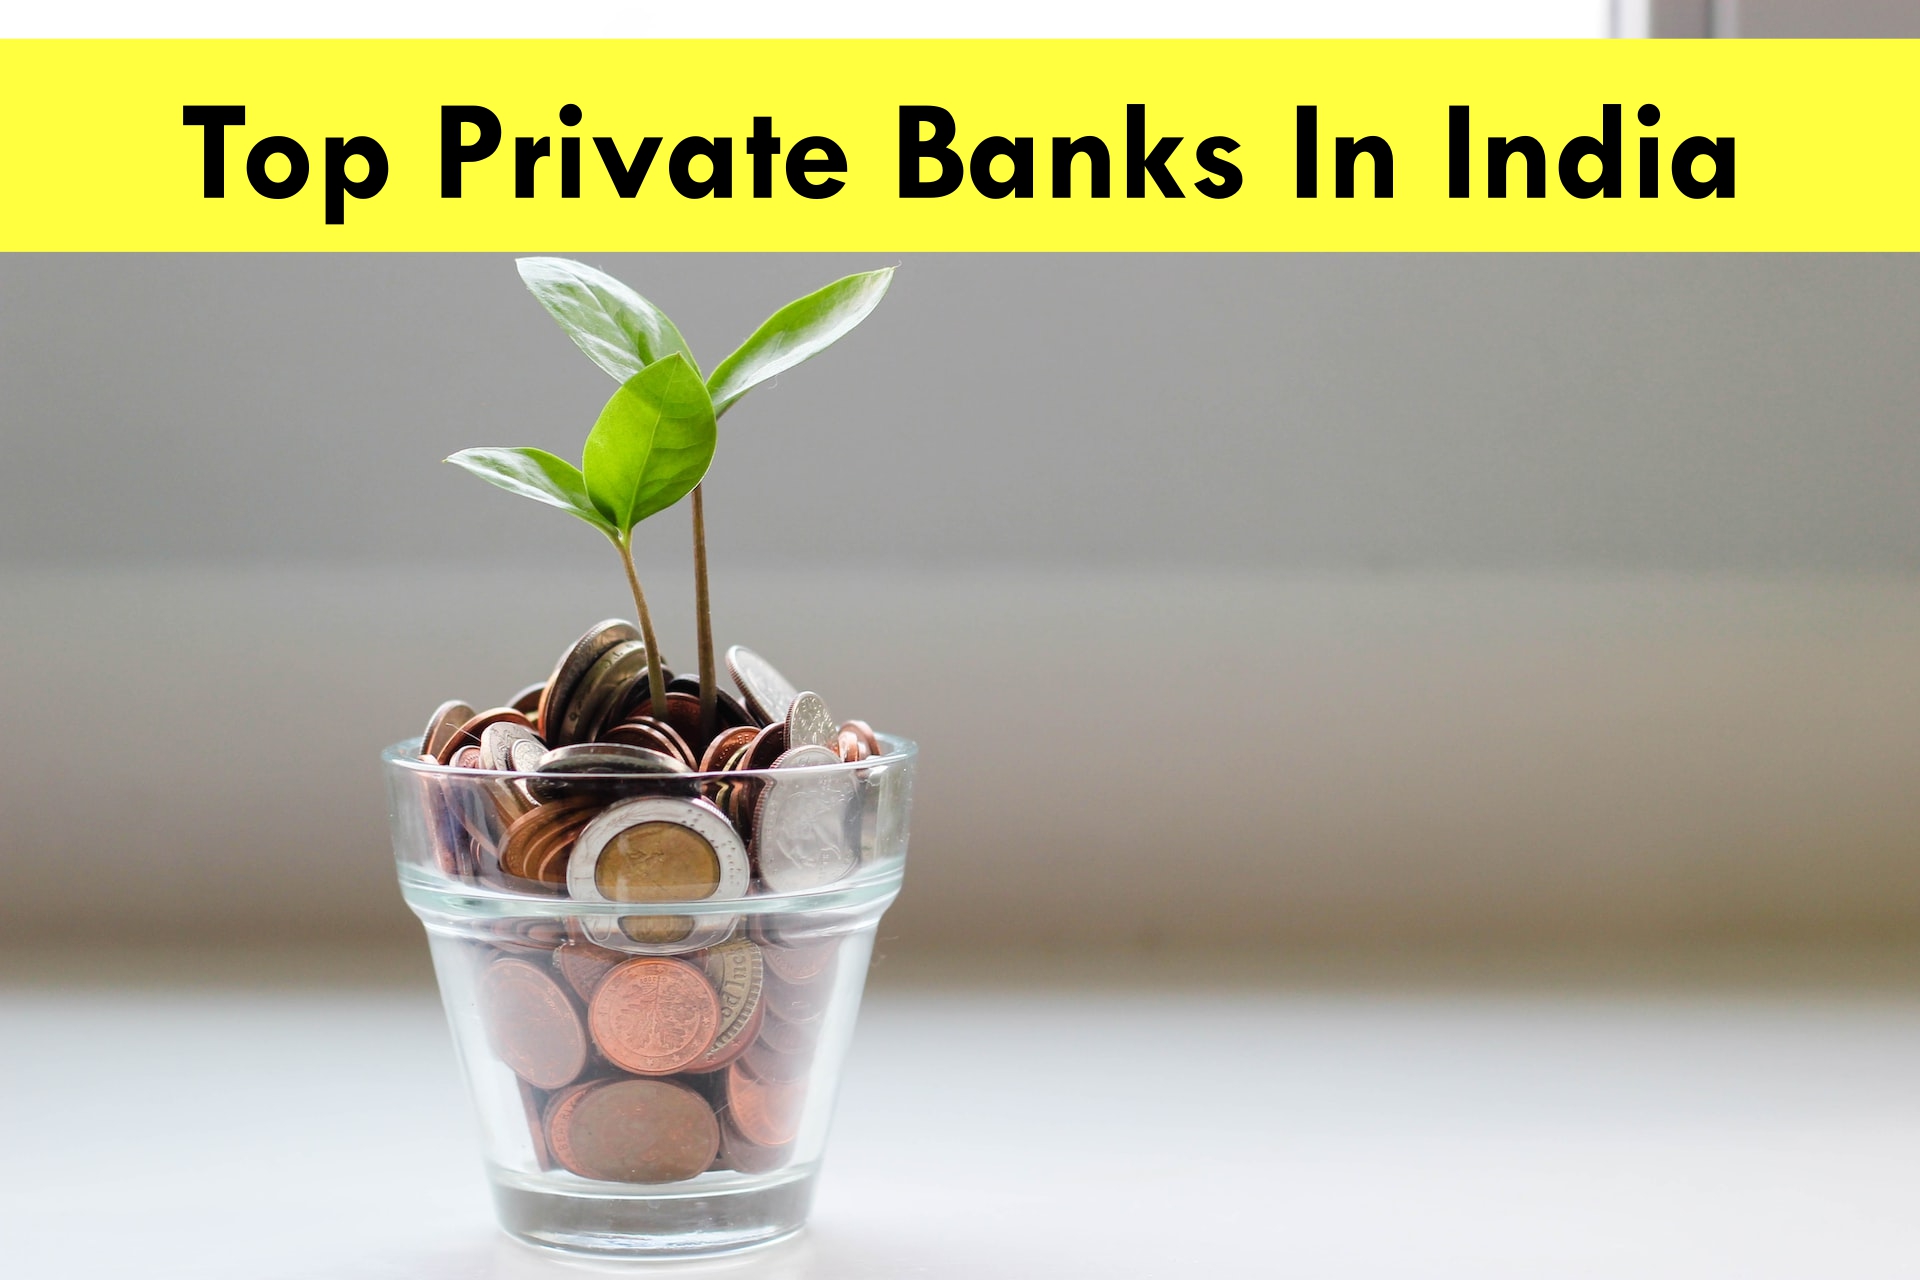 Top Private Banks In India